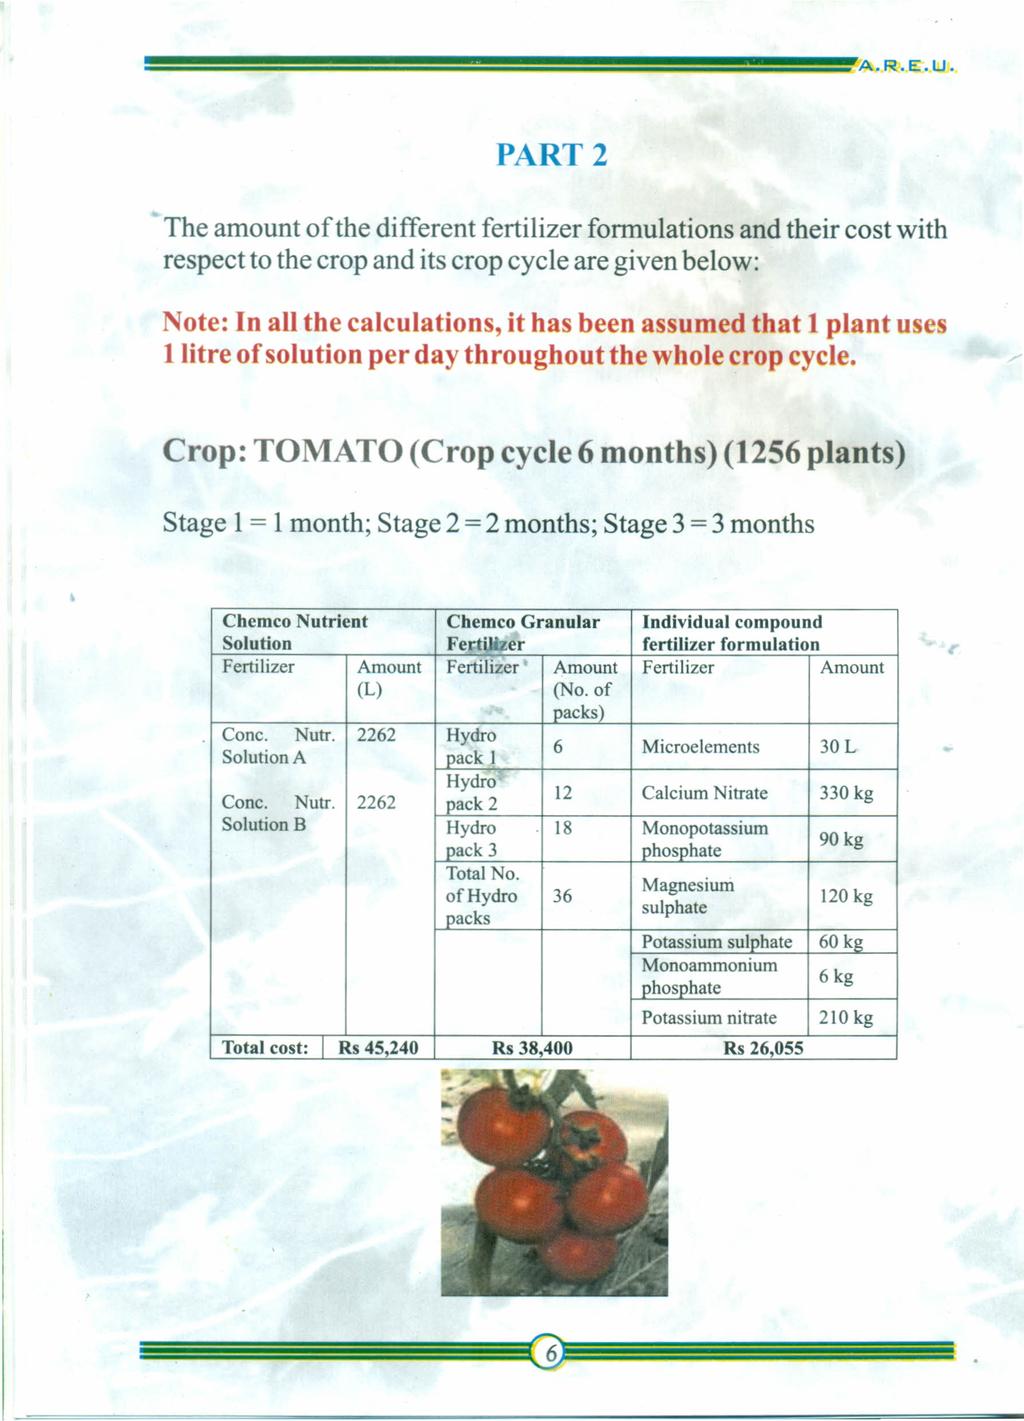 PART 2 The amount of the different fertilizer formulations and their cost with respect to the crop and its crop cycle are given below: ote: In all the calculations, it has been assumed that 1 plant